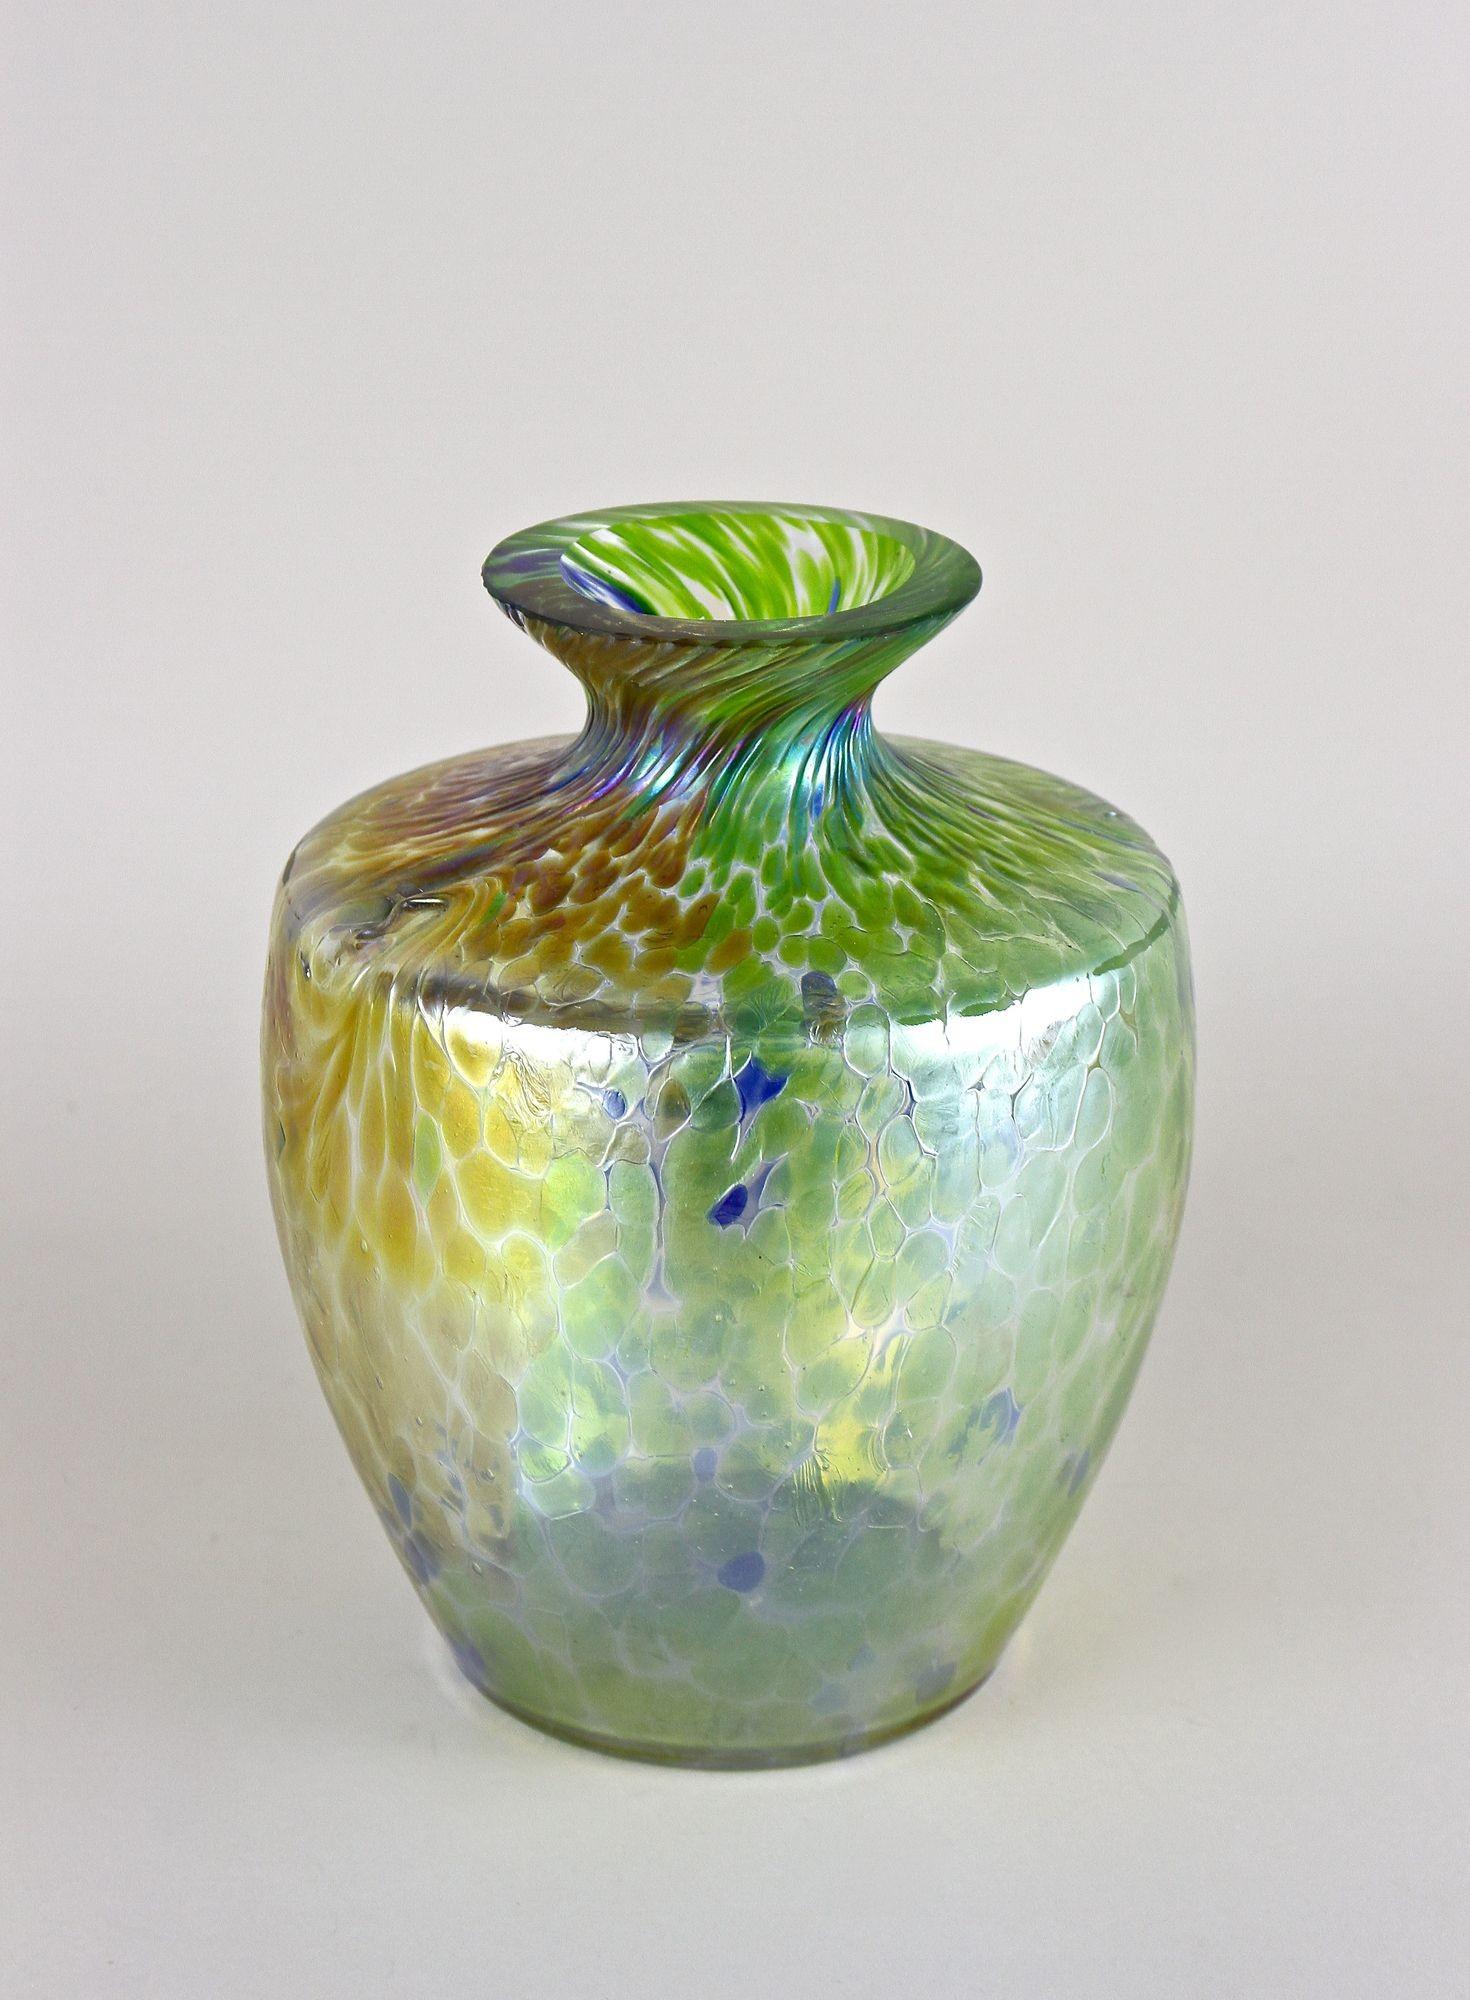 Breathtaking, large iridescent Bohemian glass vase from the Art Nouveau period around 1905. The absolute extraordinary, bulby shaped glass vase, attributed to Fritz Heckert, impresses with its one of a kind green, blue, gold and silver shimmering